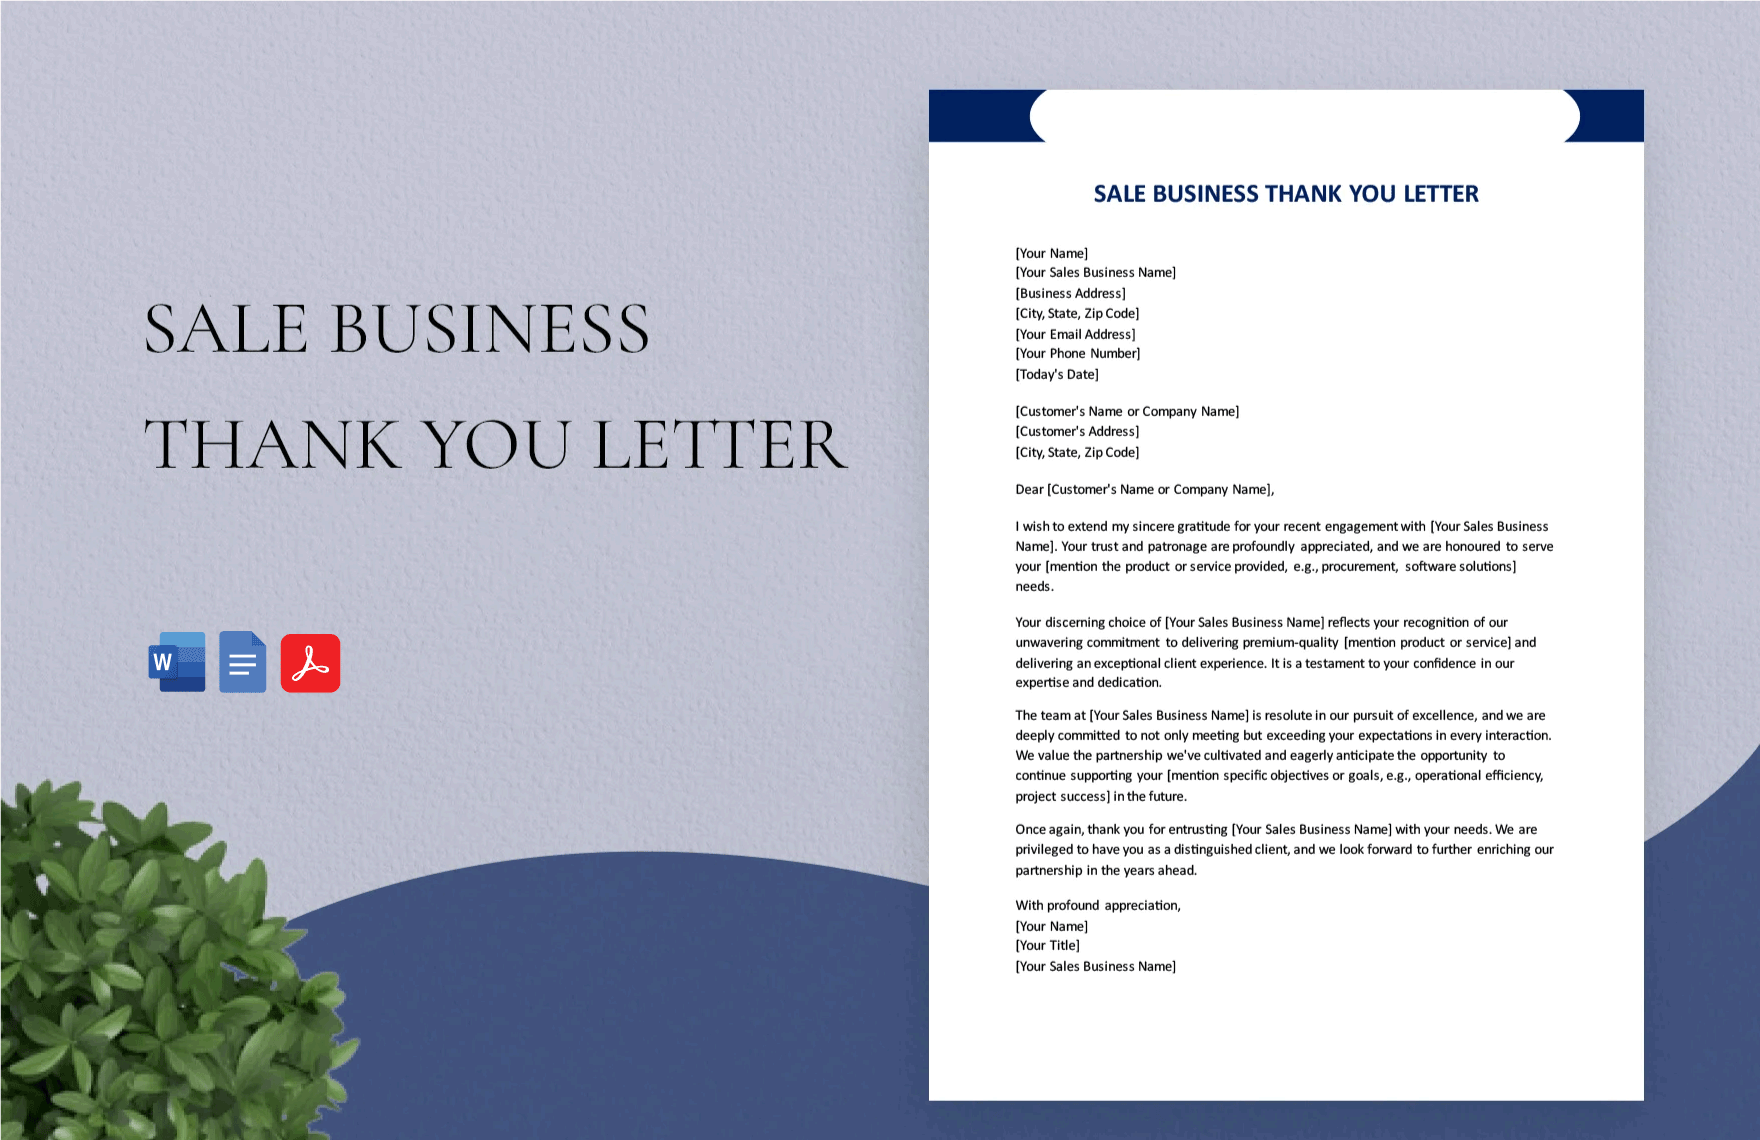 Sale Business Thank You Letter Template in Word, Google Docs, PDF